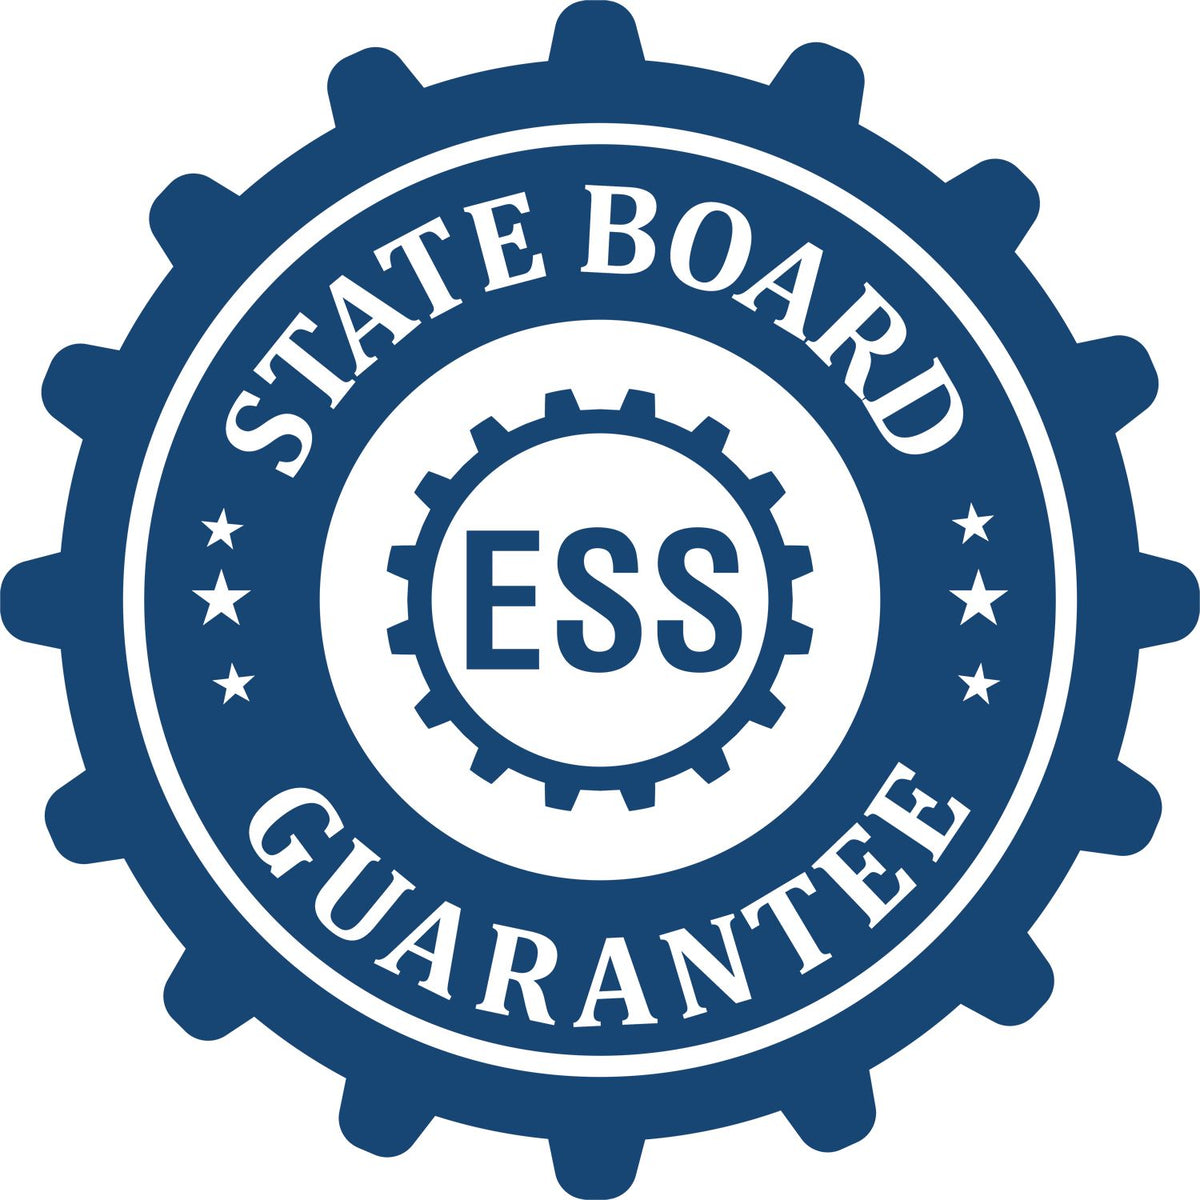 An emblem in a gear shape illustrating a state board guarantee for the Hybrid Colorado Architect Seal